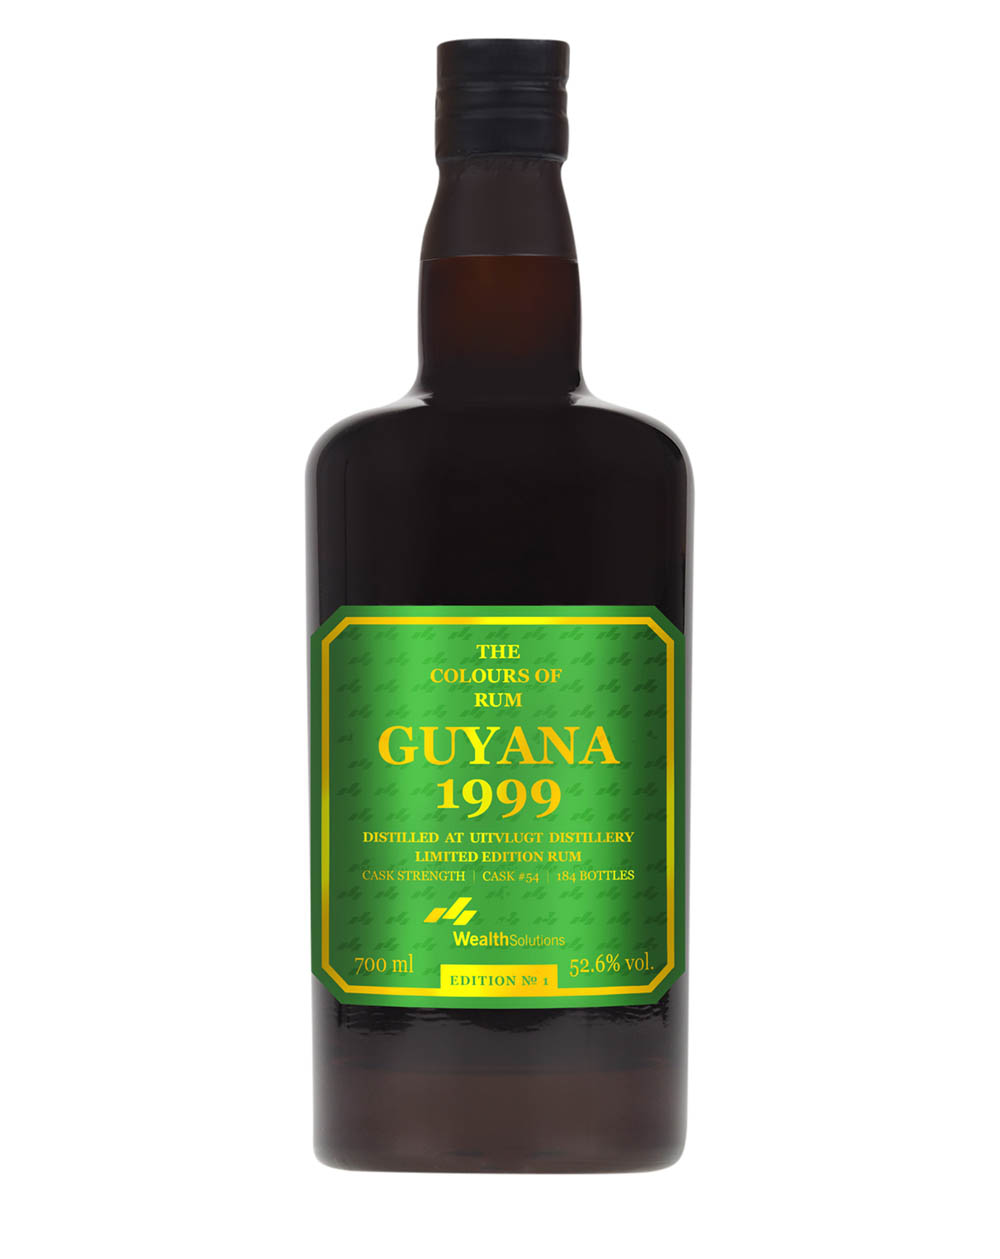 Uitvlugt Guyana 1999 The Colours Of Rum Edition 1 Musthave Malts MHM